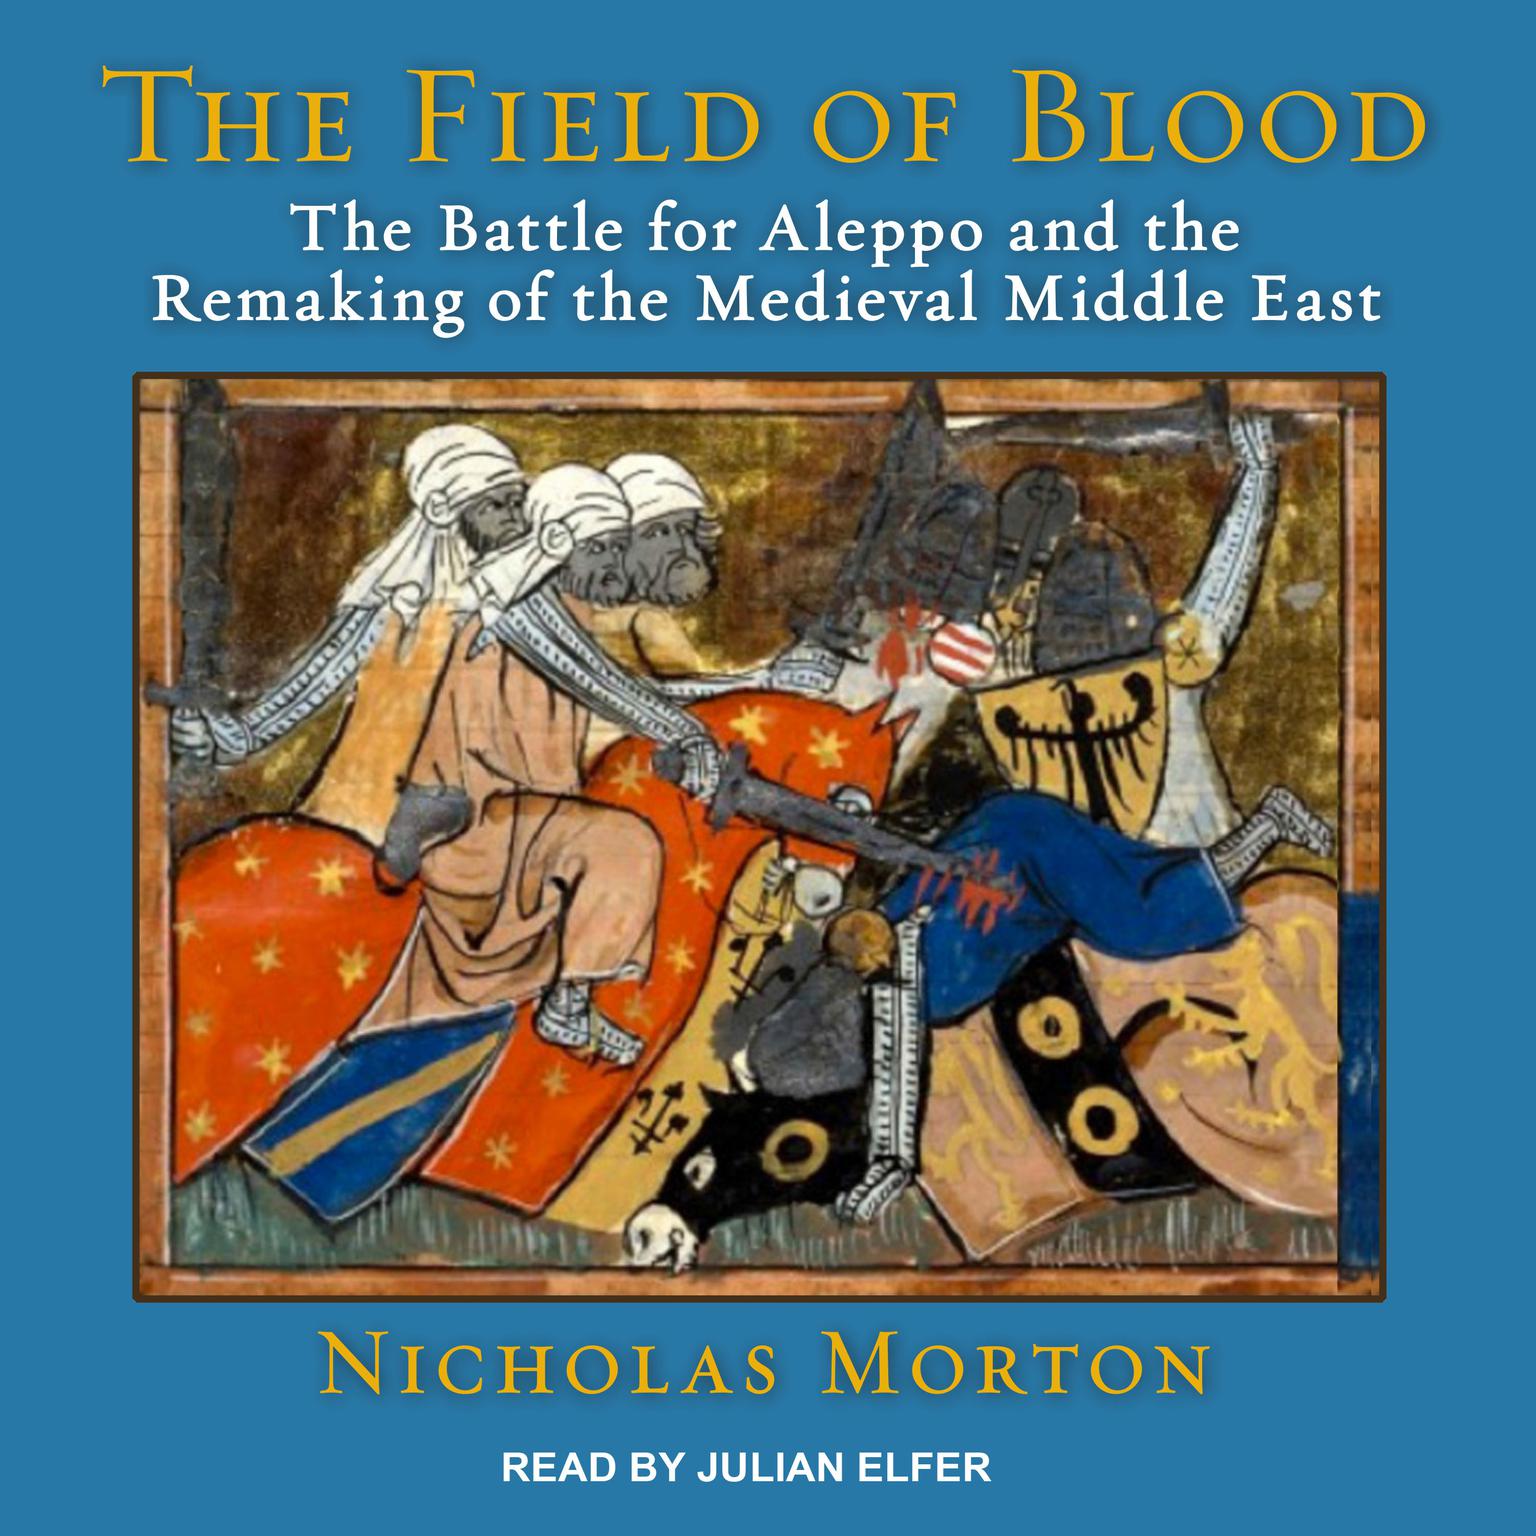 The Field of Blood: The Battle for Aleppo and the Remaking of the Medieval Middle East Audiobook, by Nicholas Morton